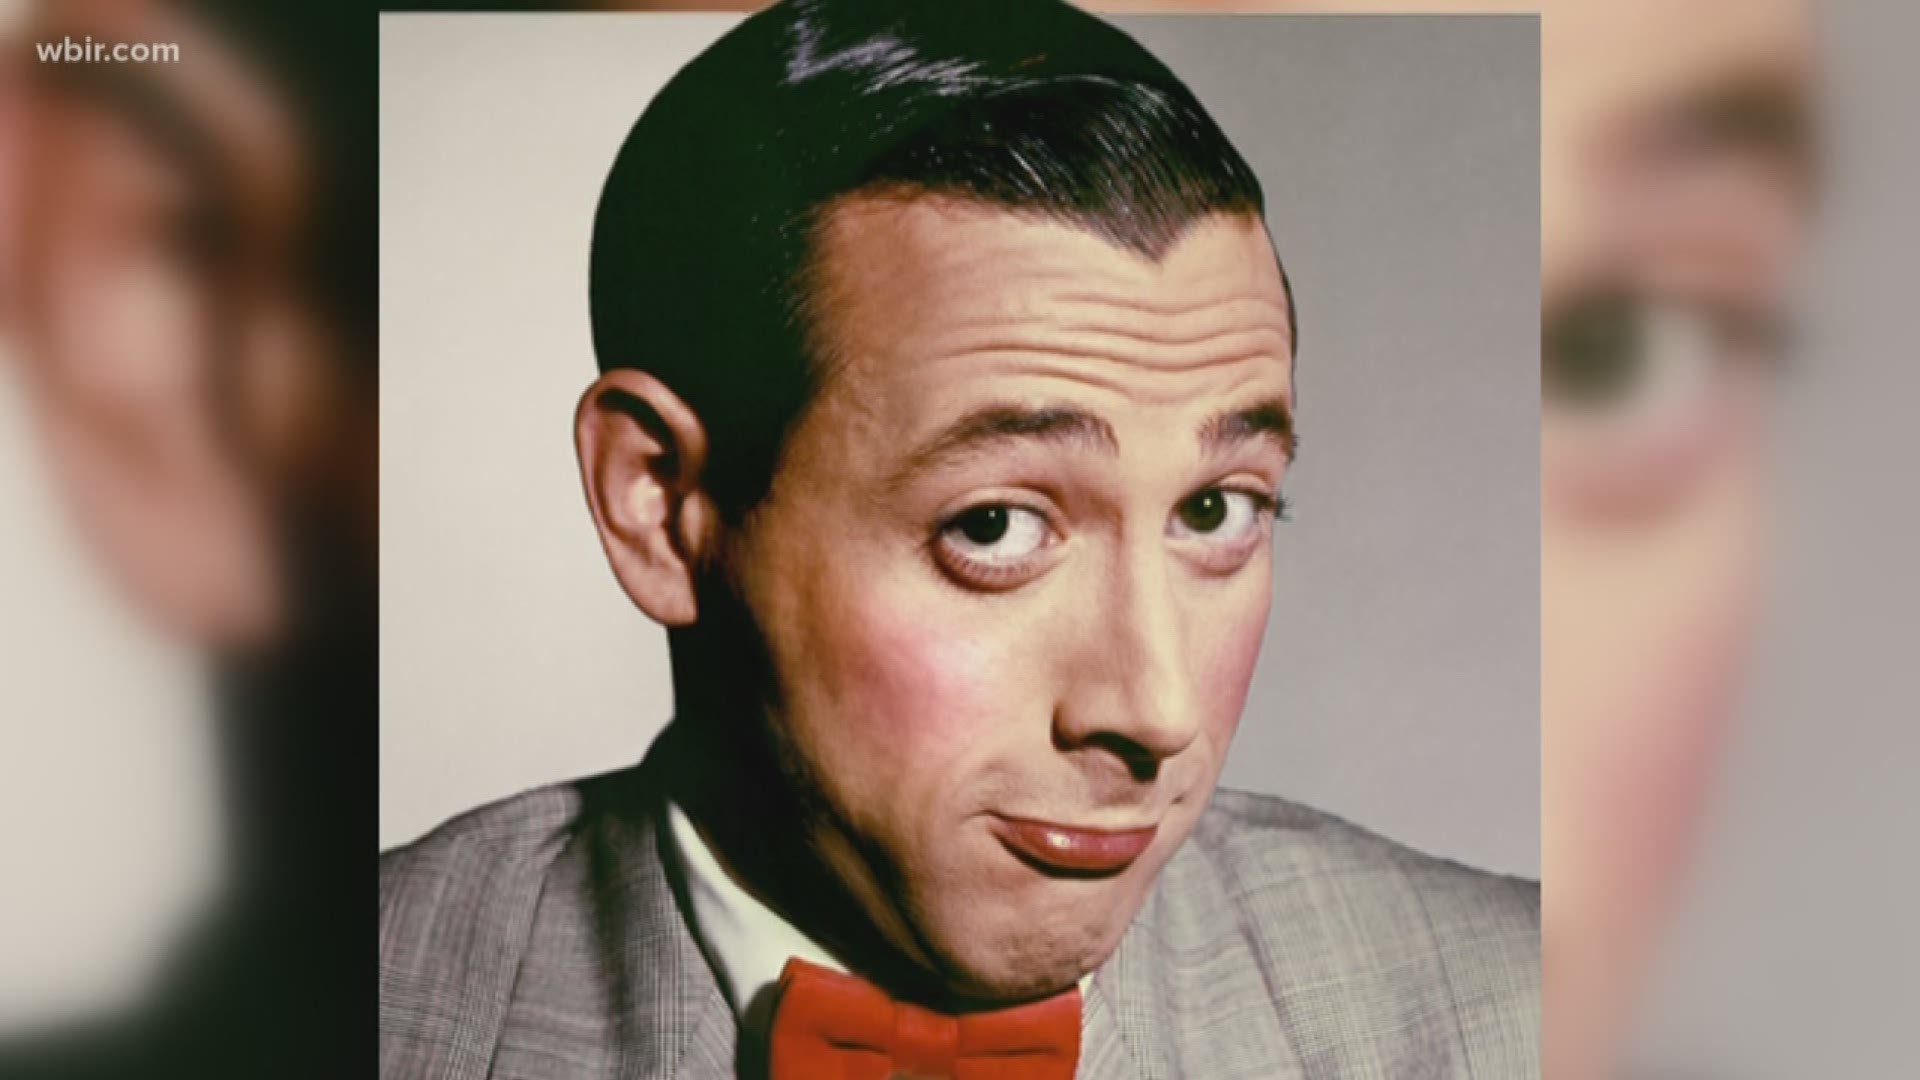 Paul Reubens is coming to the Knoxville Fanboy Expo later this summer. Molly Ringwald had to cancel due to filming schedule changes.